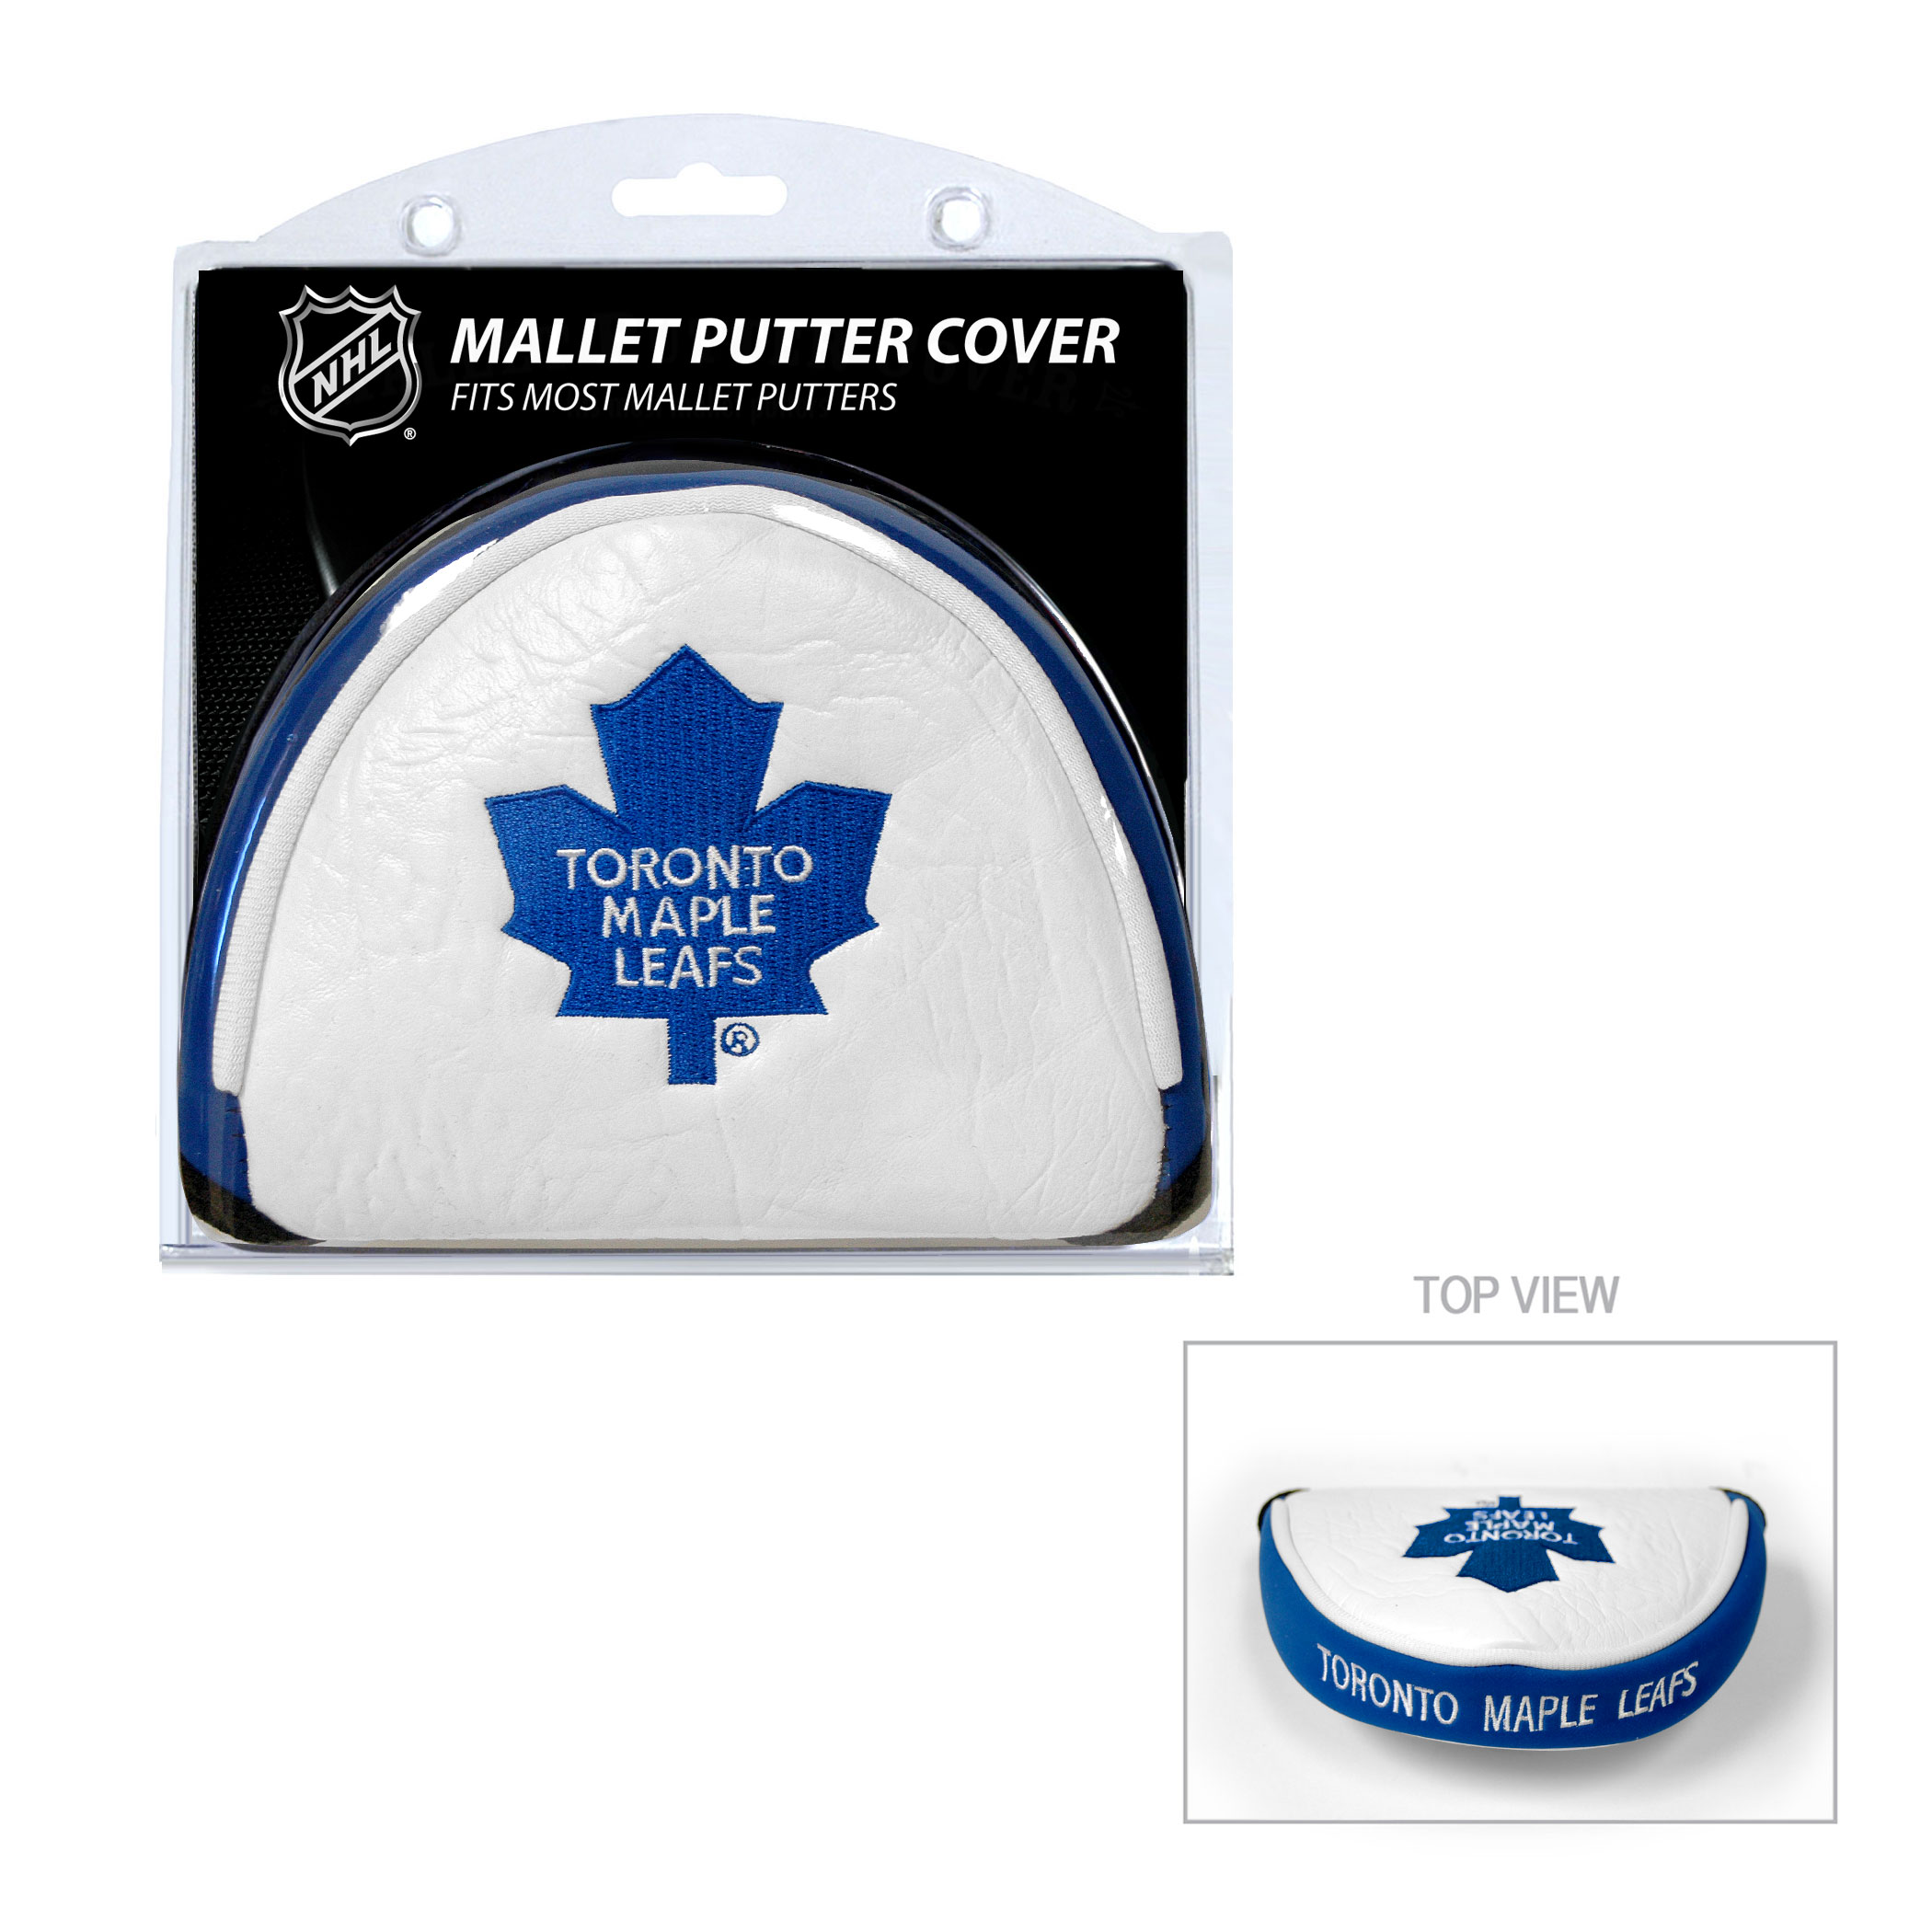 Toronto Maple Leafs Mallet Putter Cover